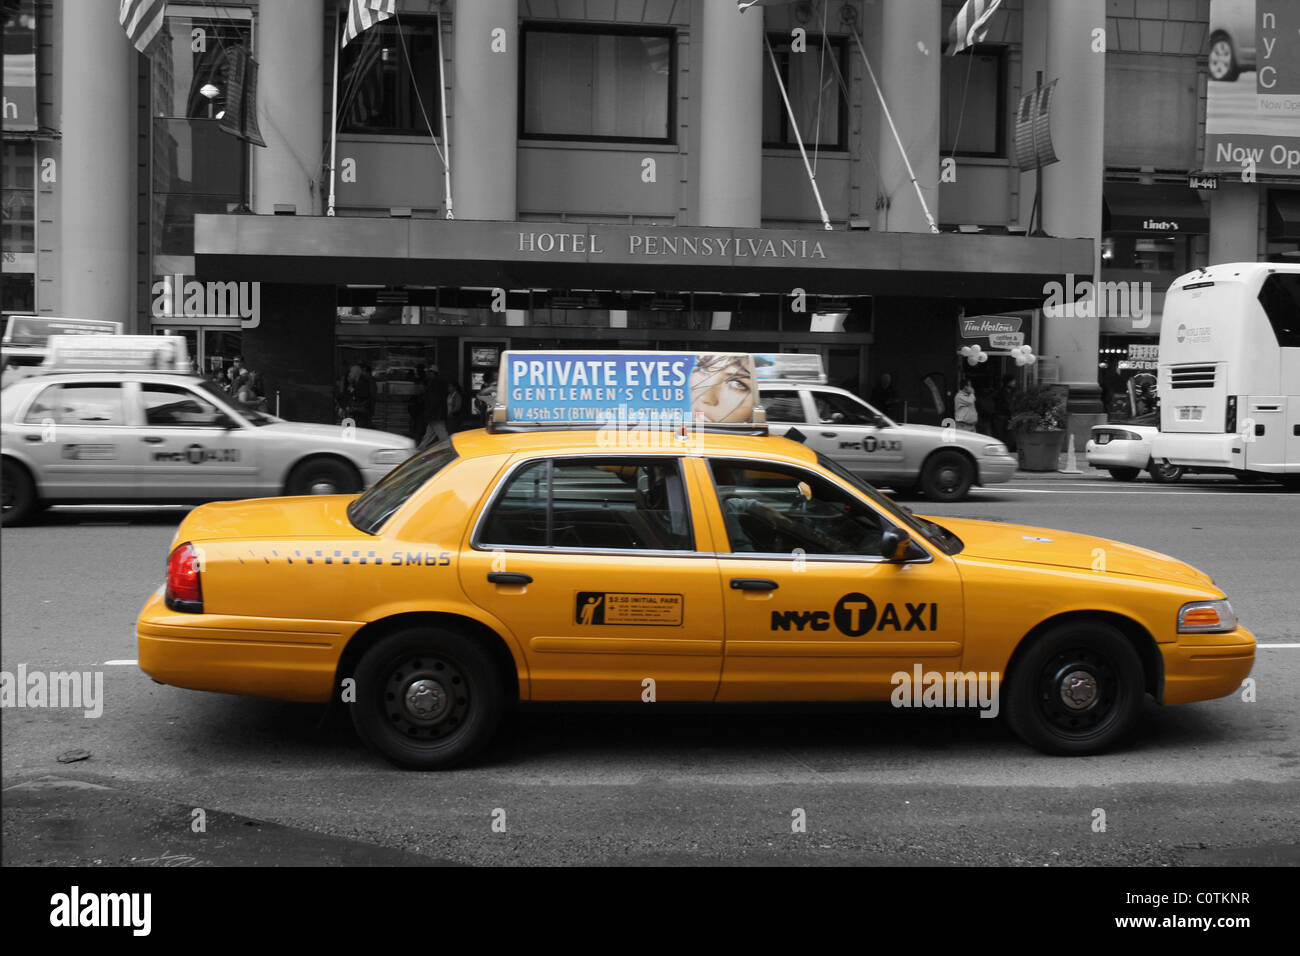 Selective color image of a New York taxi cab taken outside the Hotel Pennsylvania, 401 Seventh Ave, New York City. Stock Photo